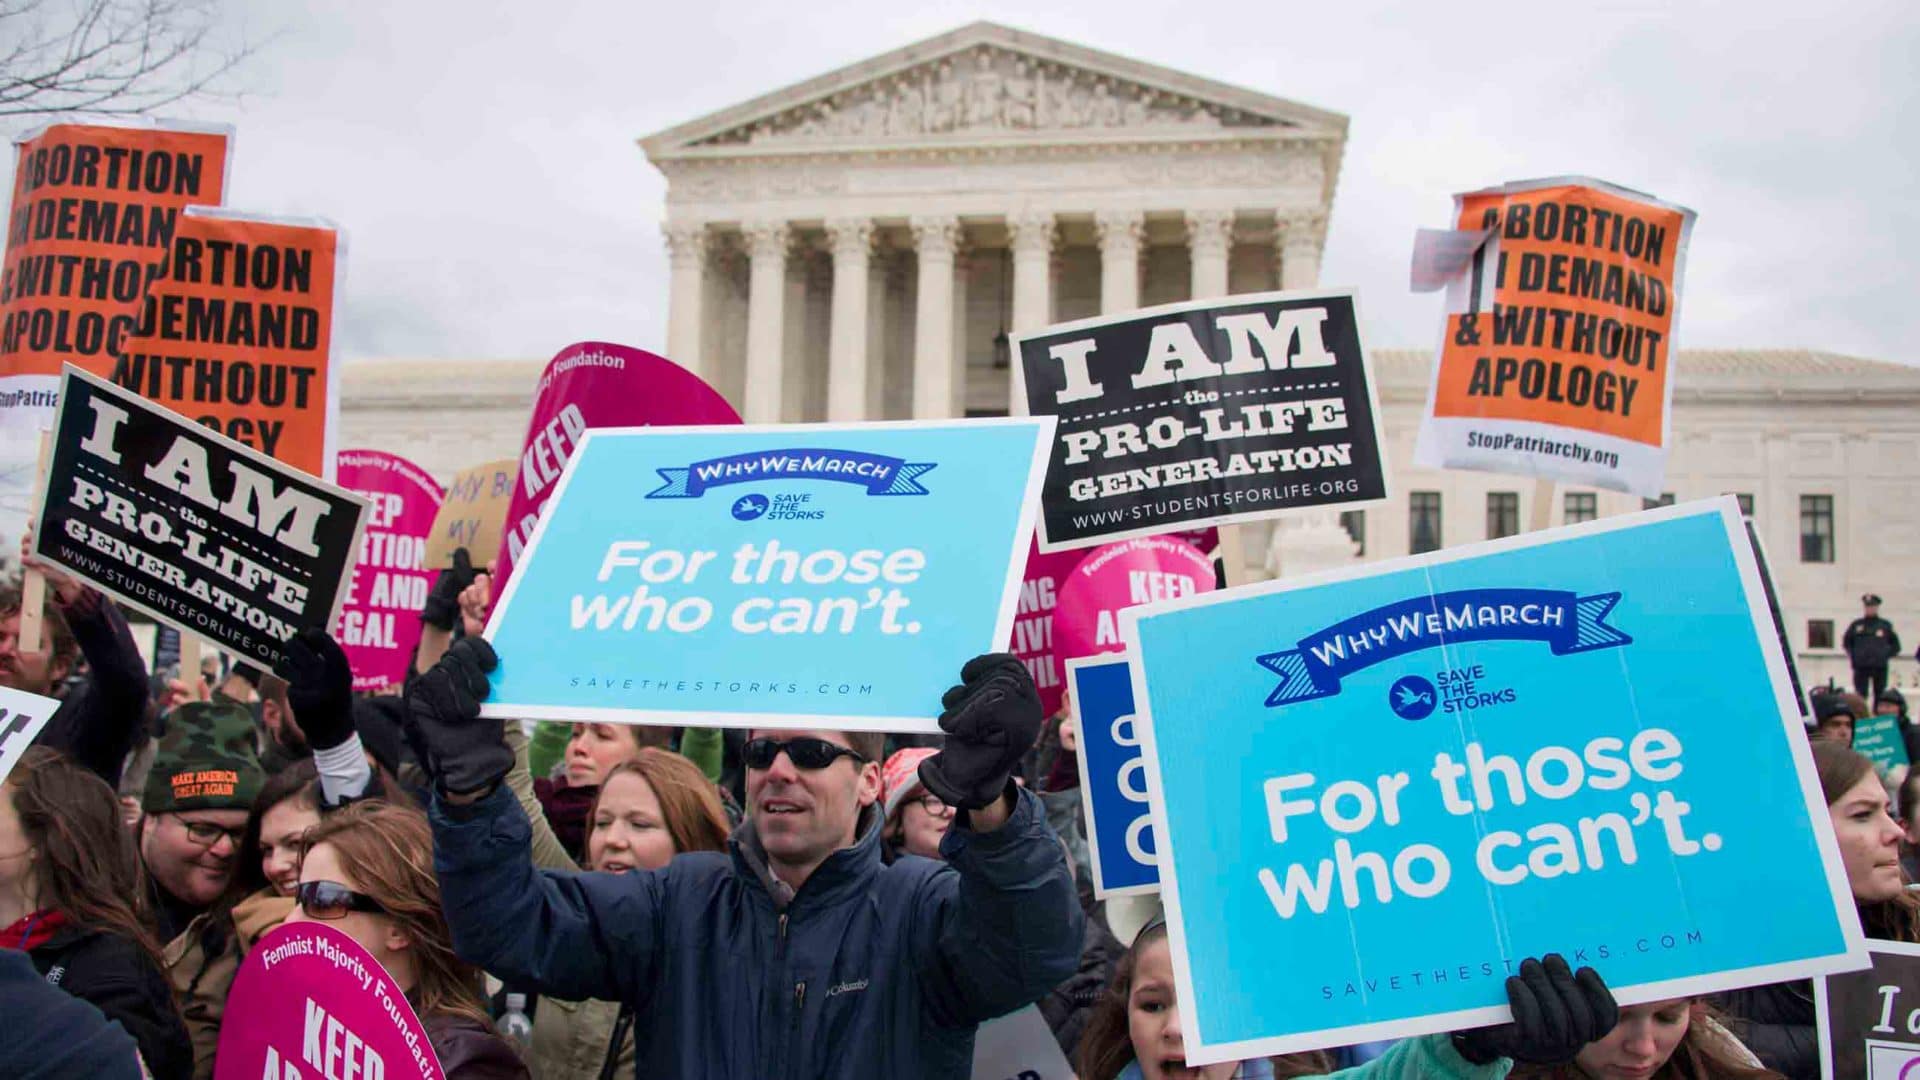 Anti-abortion activists demonstrate in front of abortion activists as they intermix during a demonstration in front of the US Supreme Court during the March For Life in Washington, D.C., on January 27, 2017.